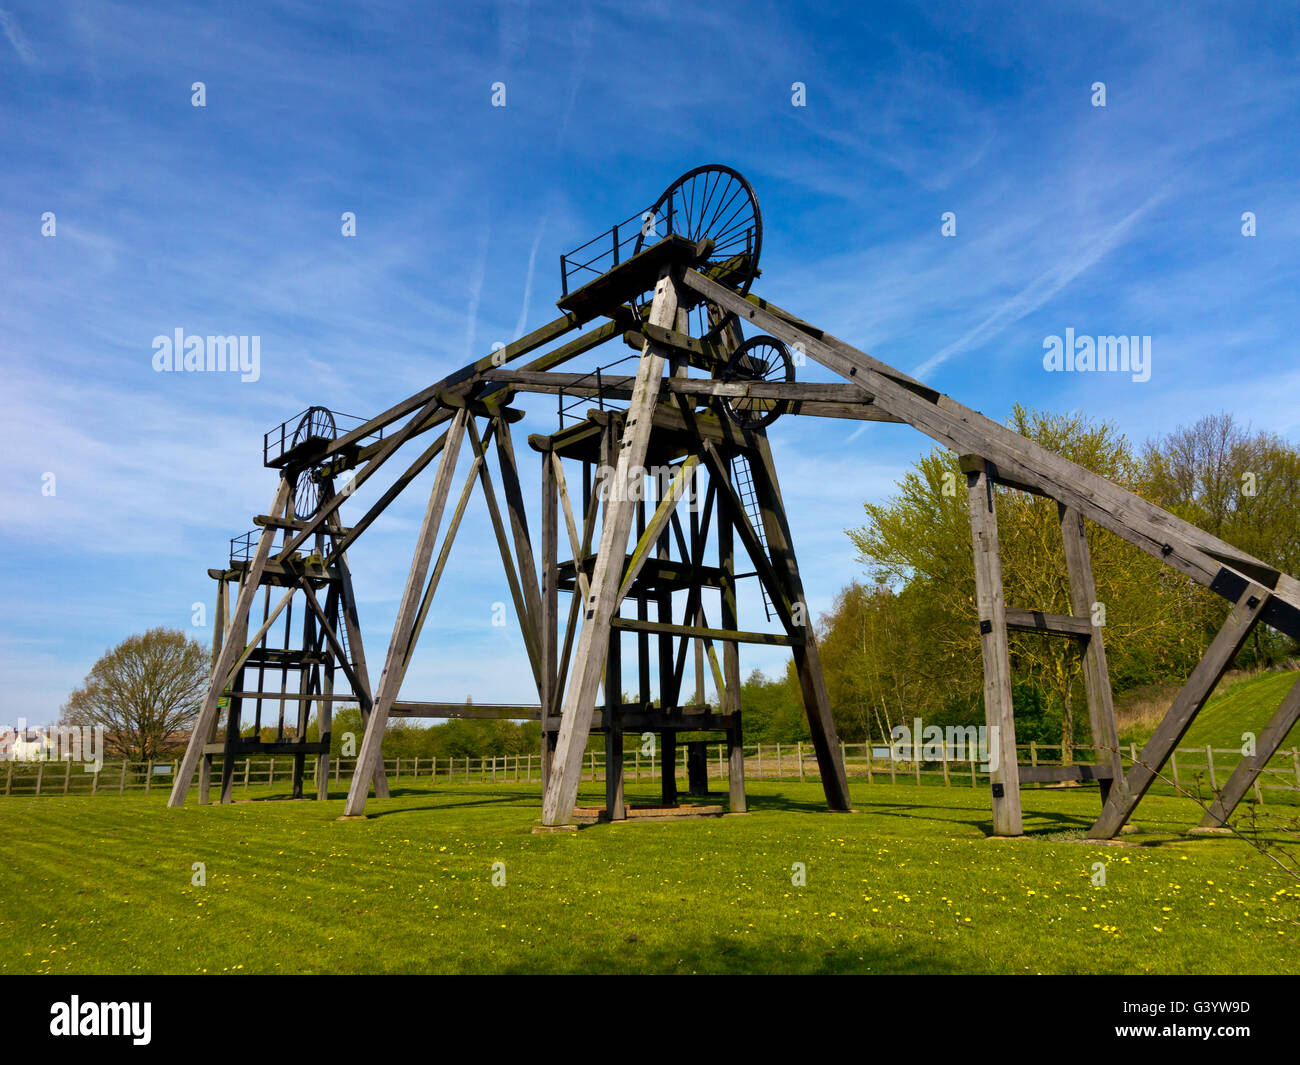 Brinsley Headstocks the remains of a former coal mine near Eastwood in Nottinghamshire England UK which closed in 1934 Stock Photo